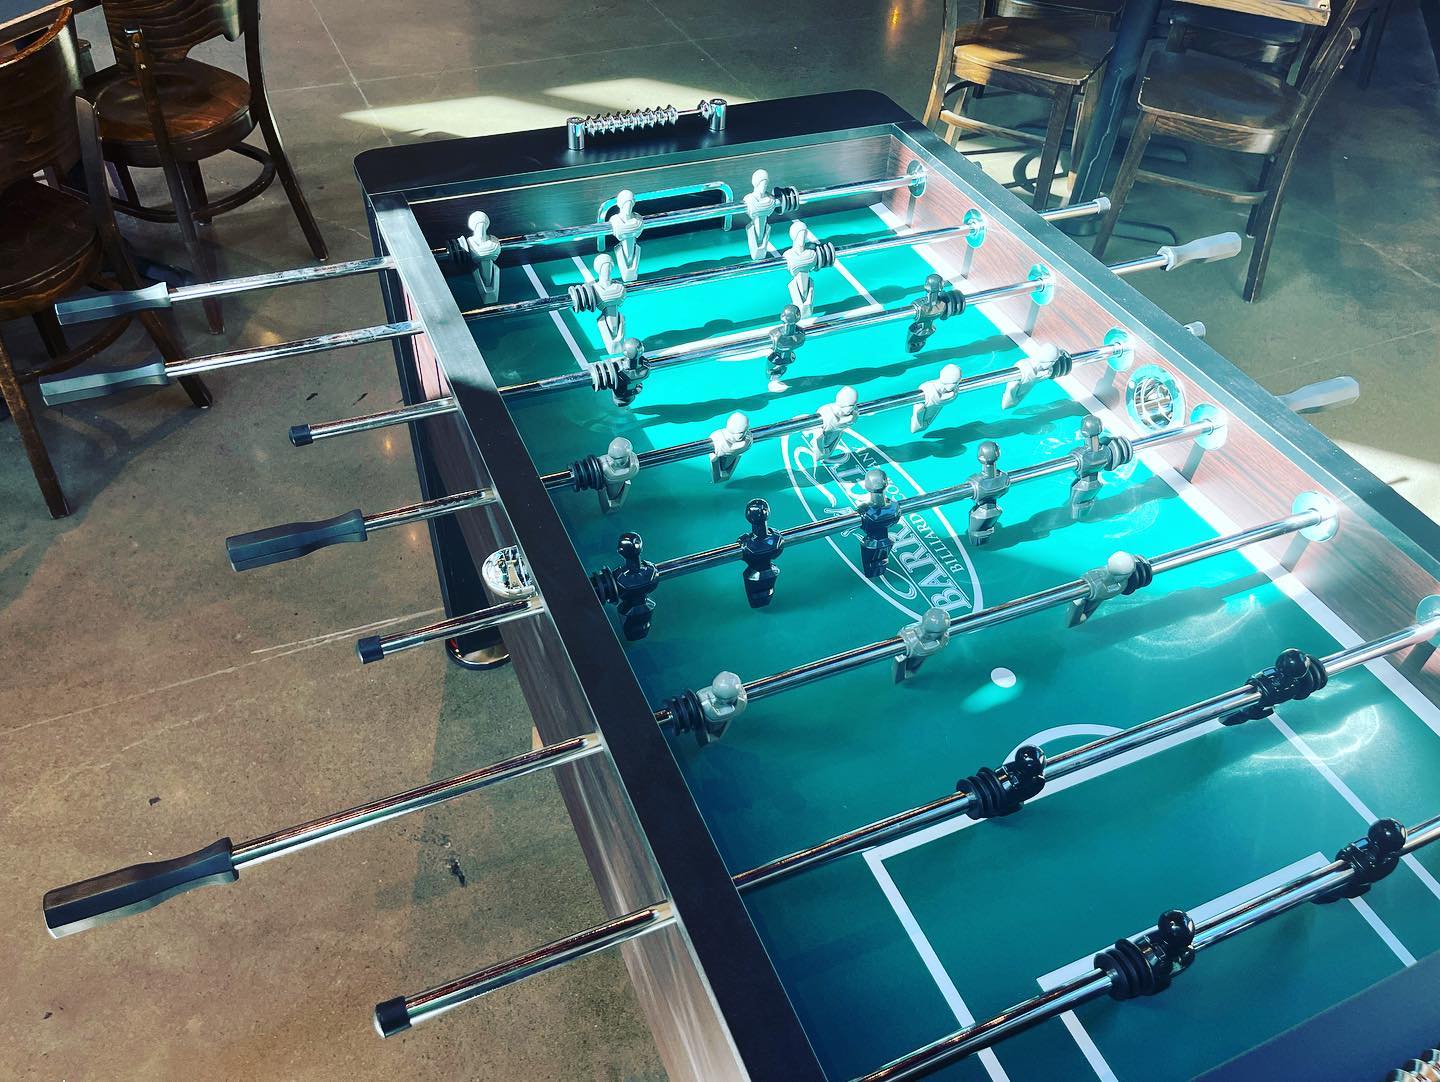 Game table at the Tanasbourne location.